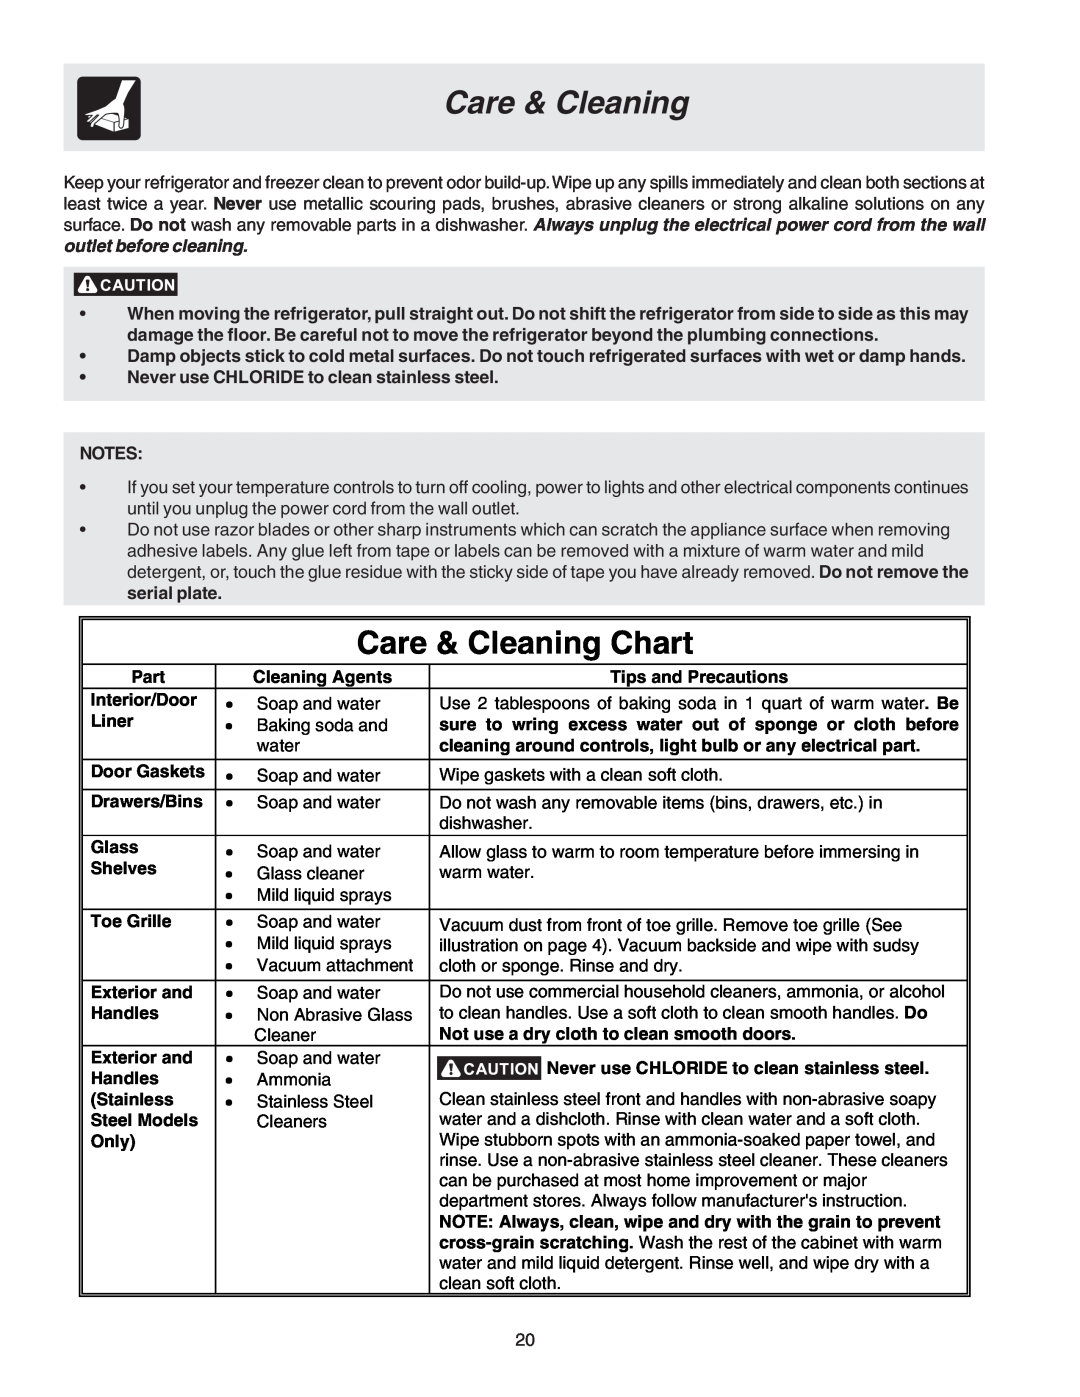 Frigidaire Compact Refrigerator manual Care & Cleaning Chart 